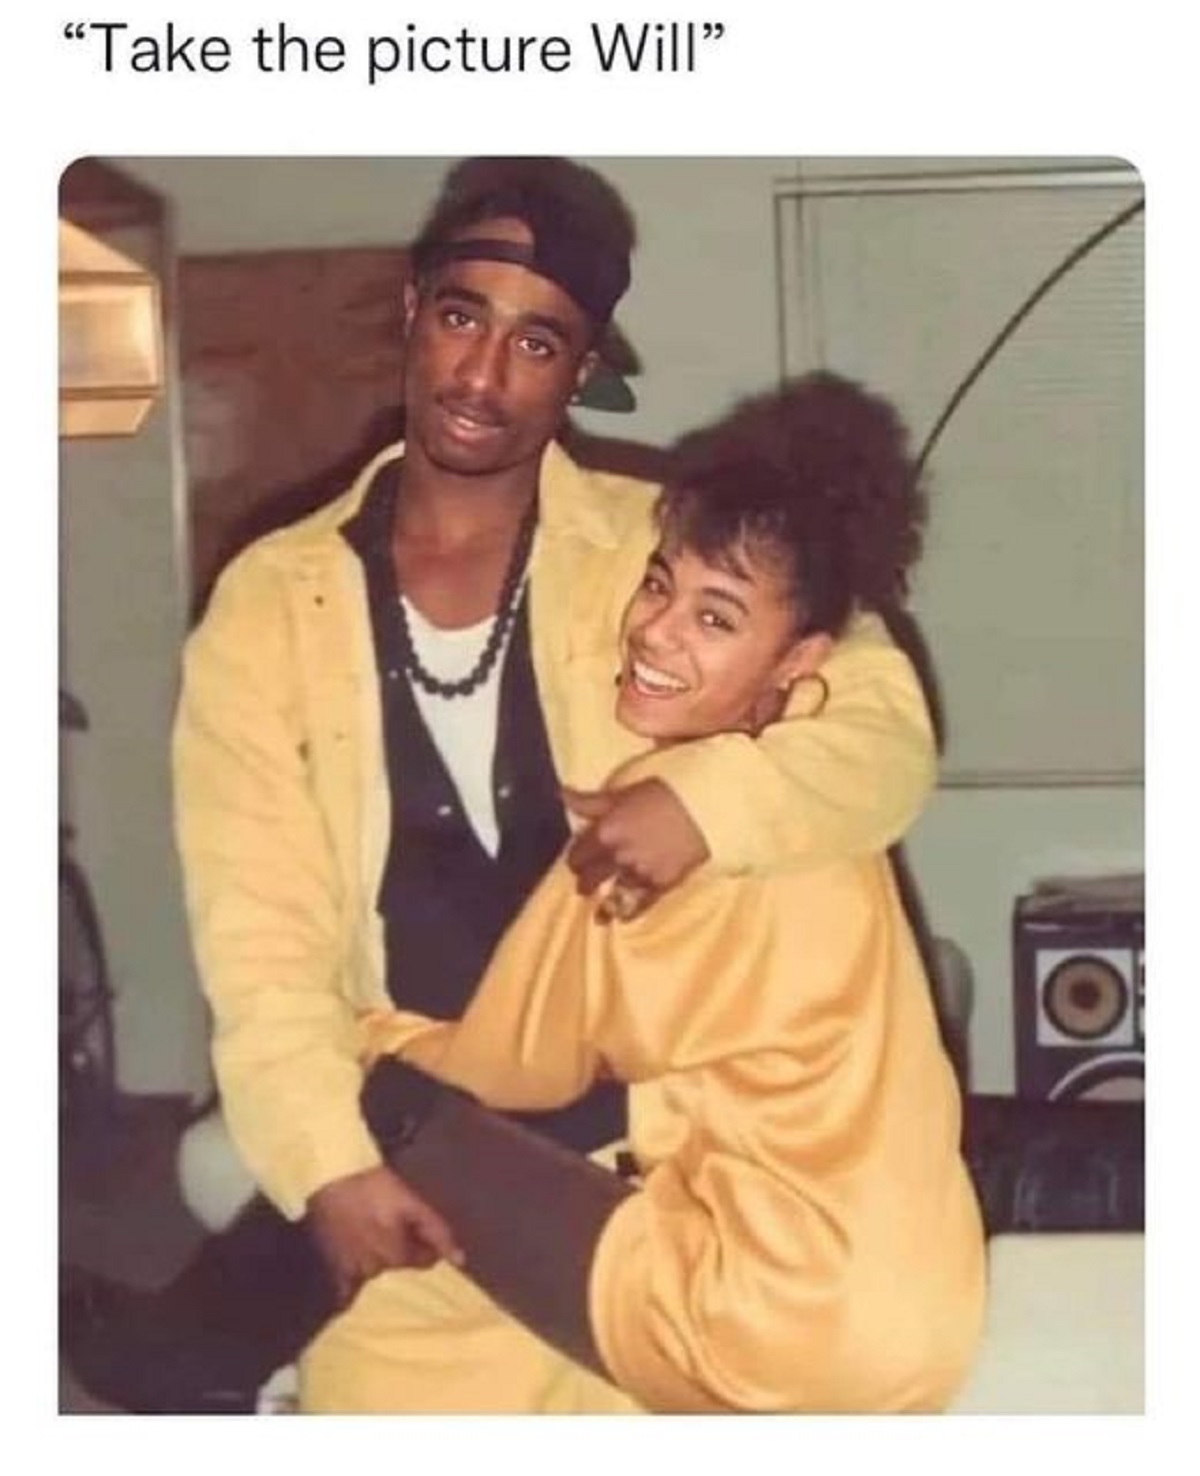 2pac and jada - "Take the picture Will"